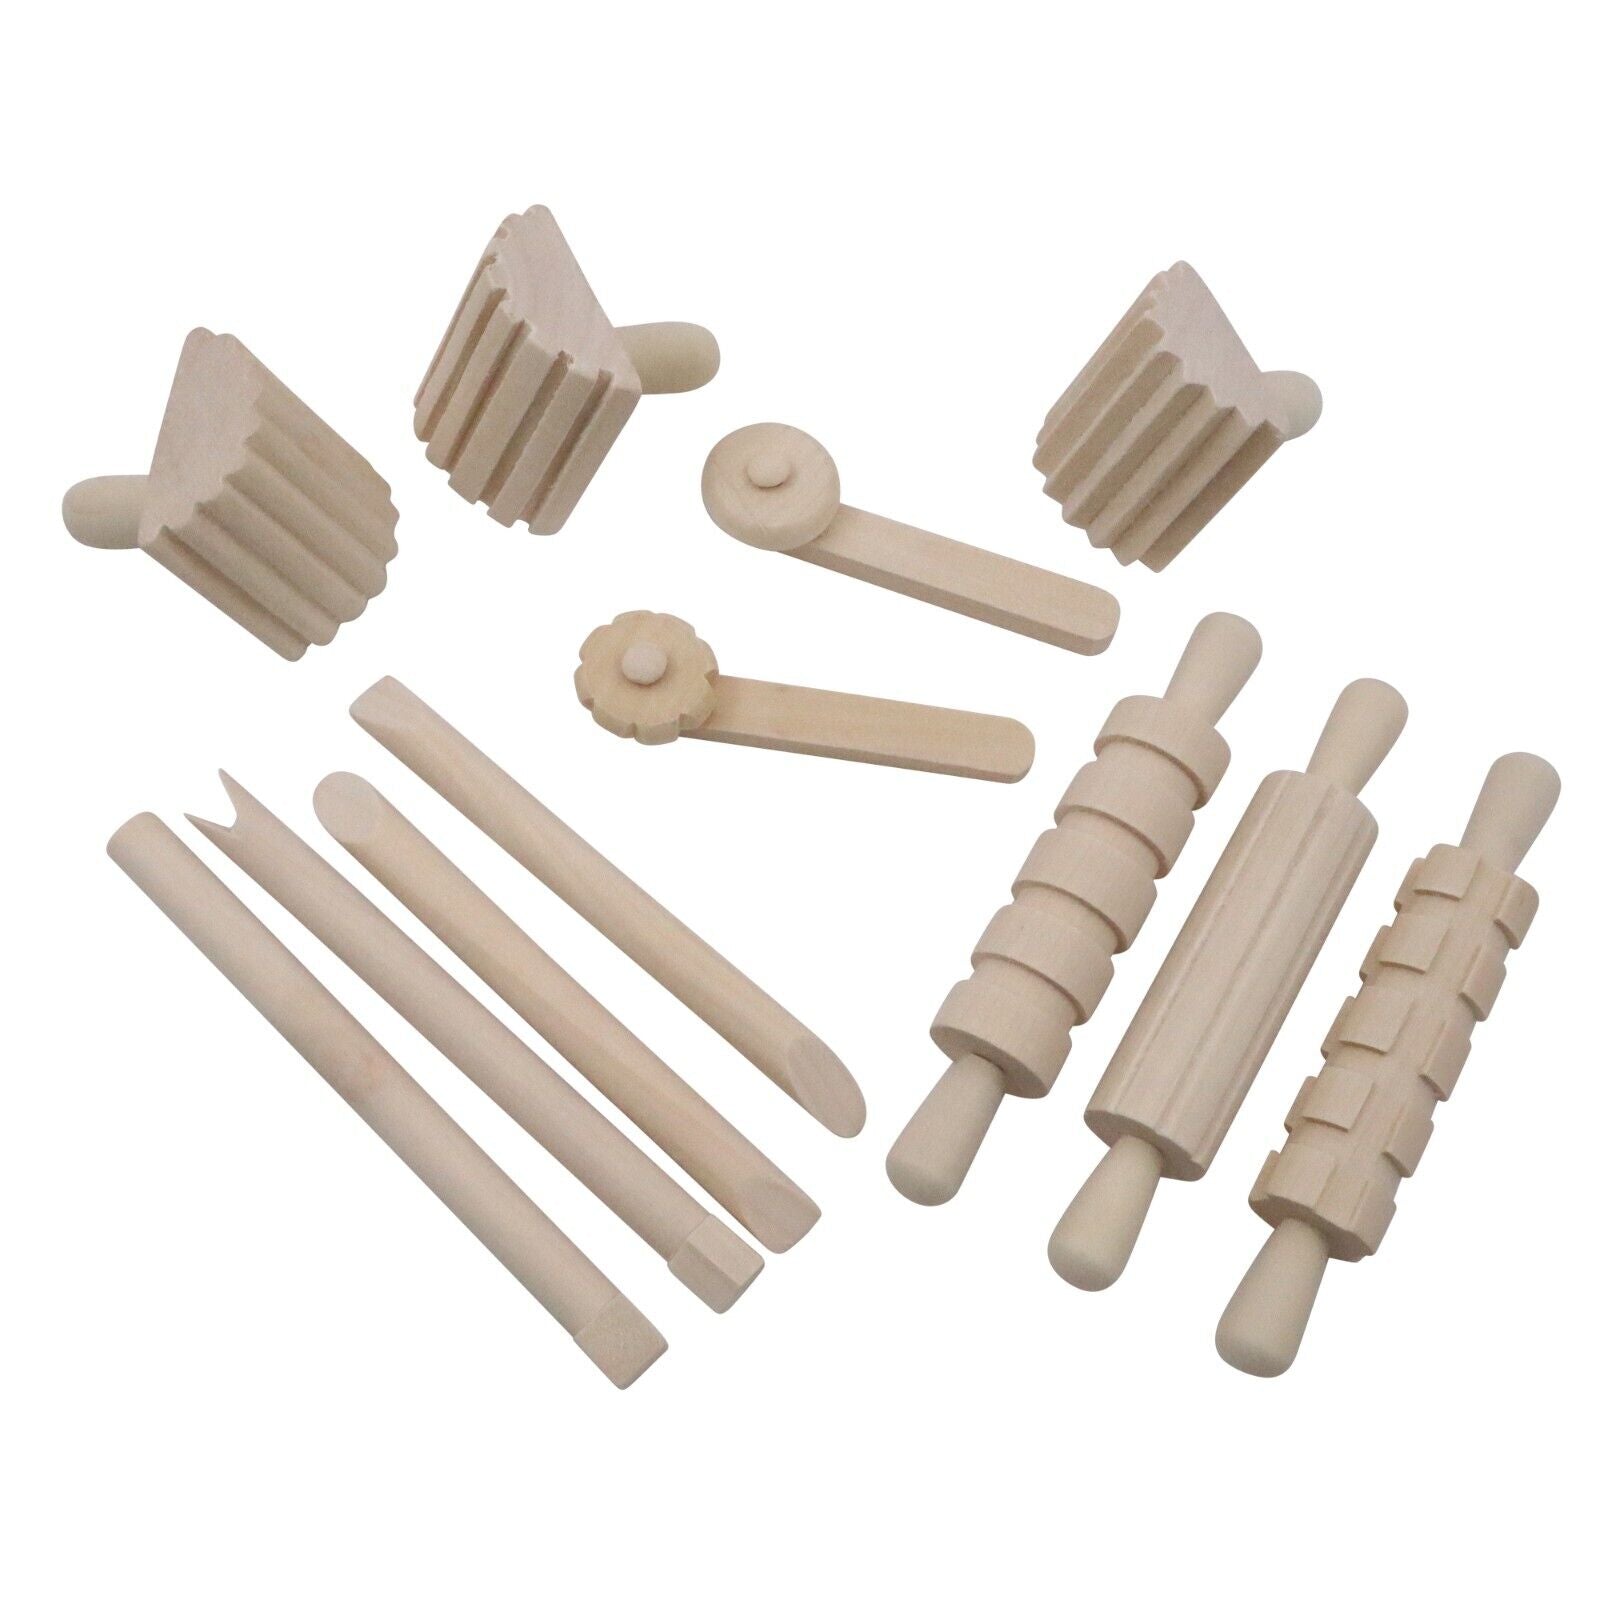 Wooden Dough Tool Set of 12 | Learning and Exploring Through Play